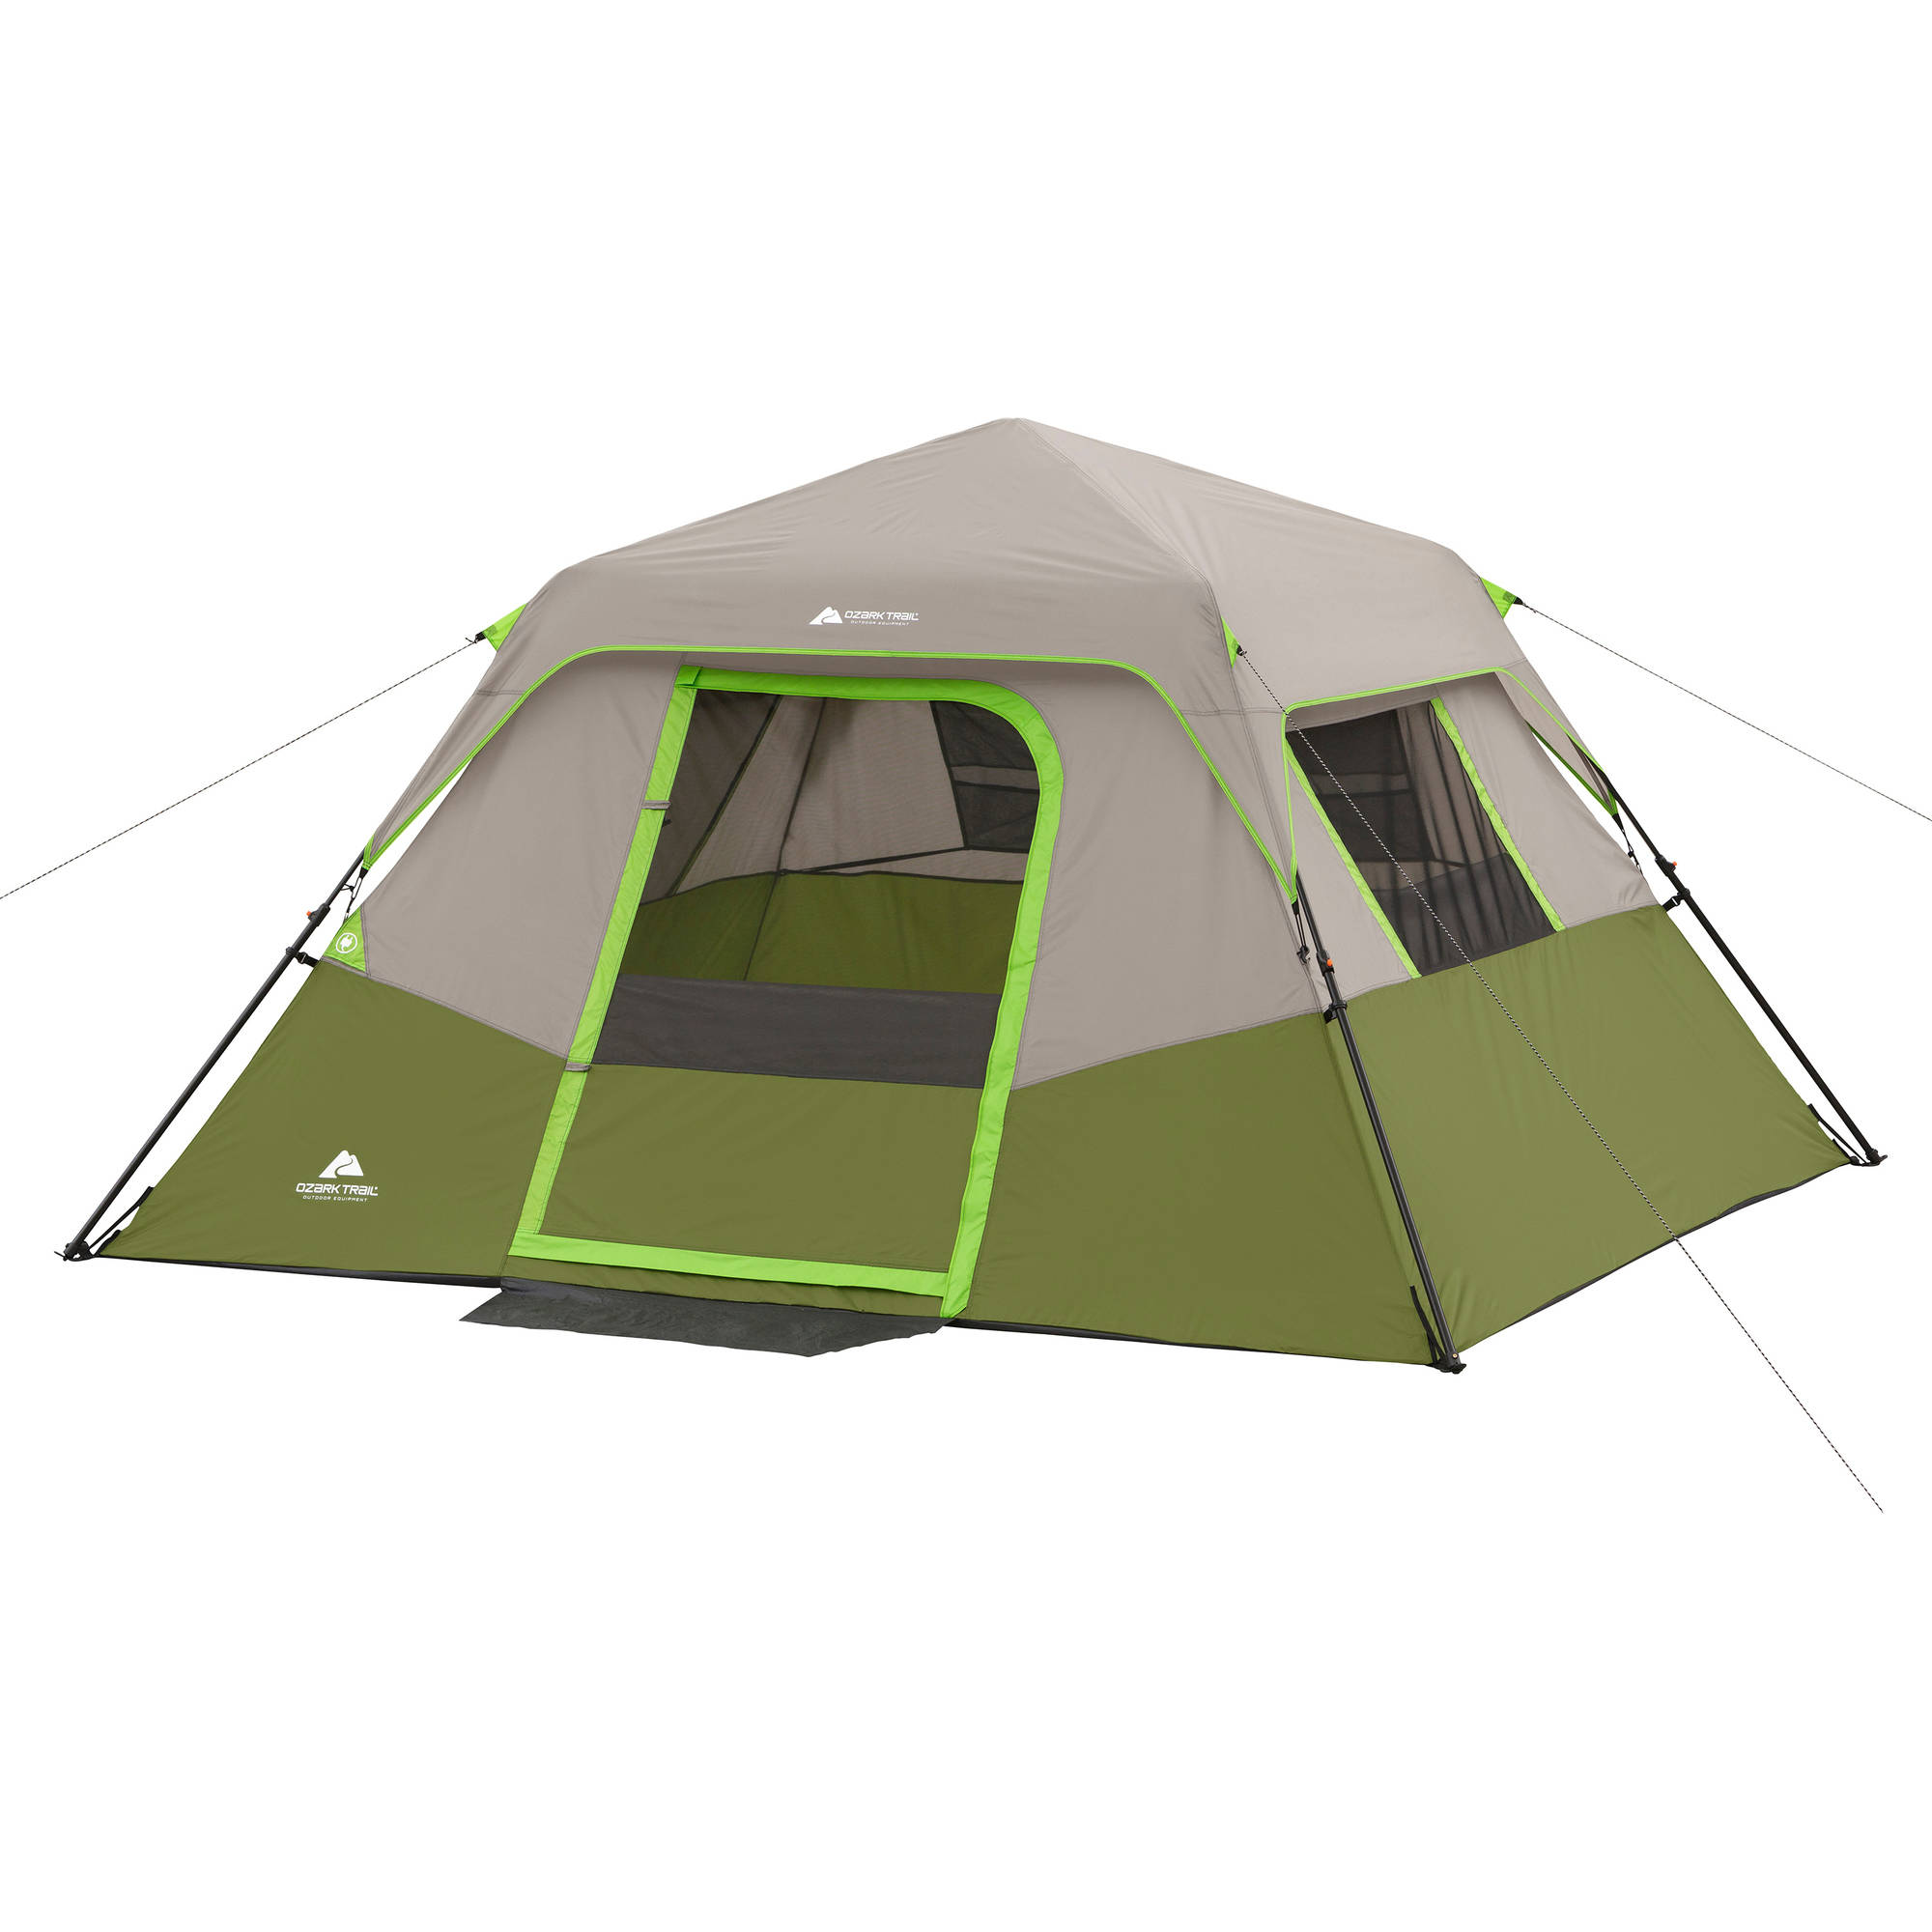 Ozark Trail 6 Person Instant Cabin Tent - image 1 of 8